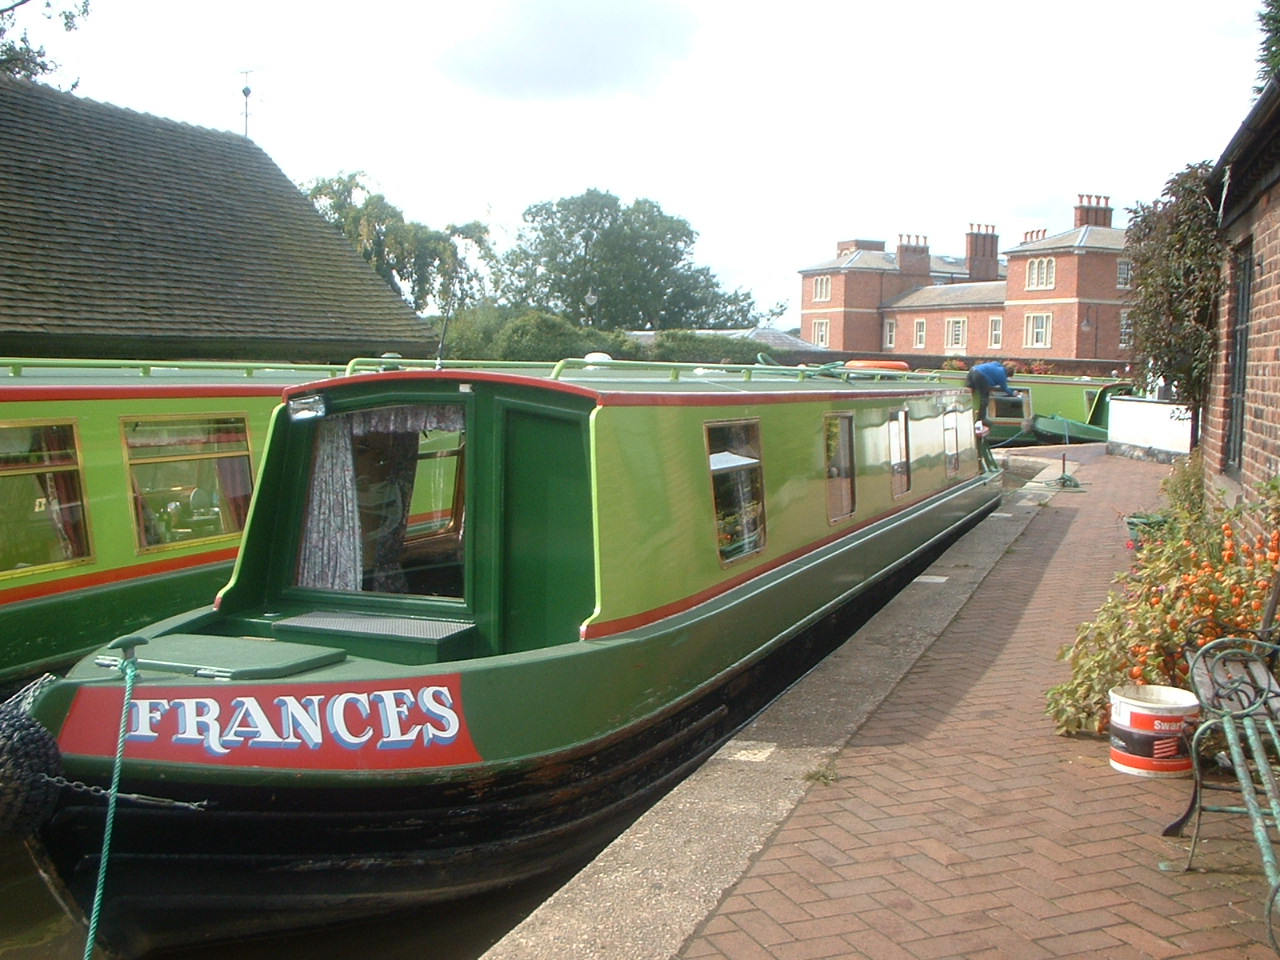 The Classic4 class canal boat